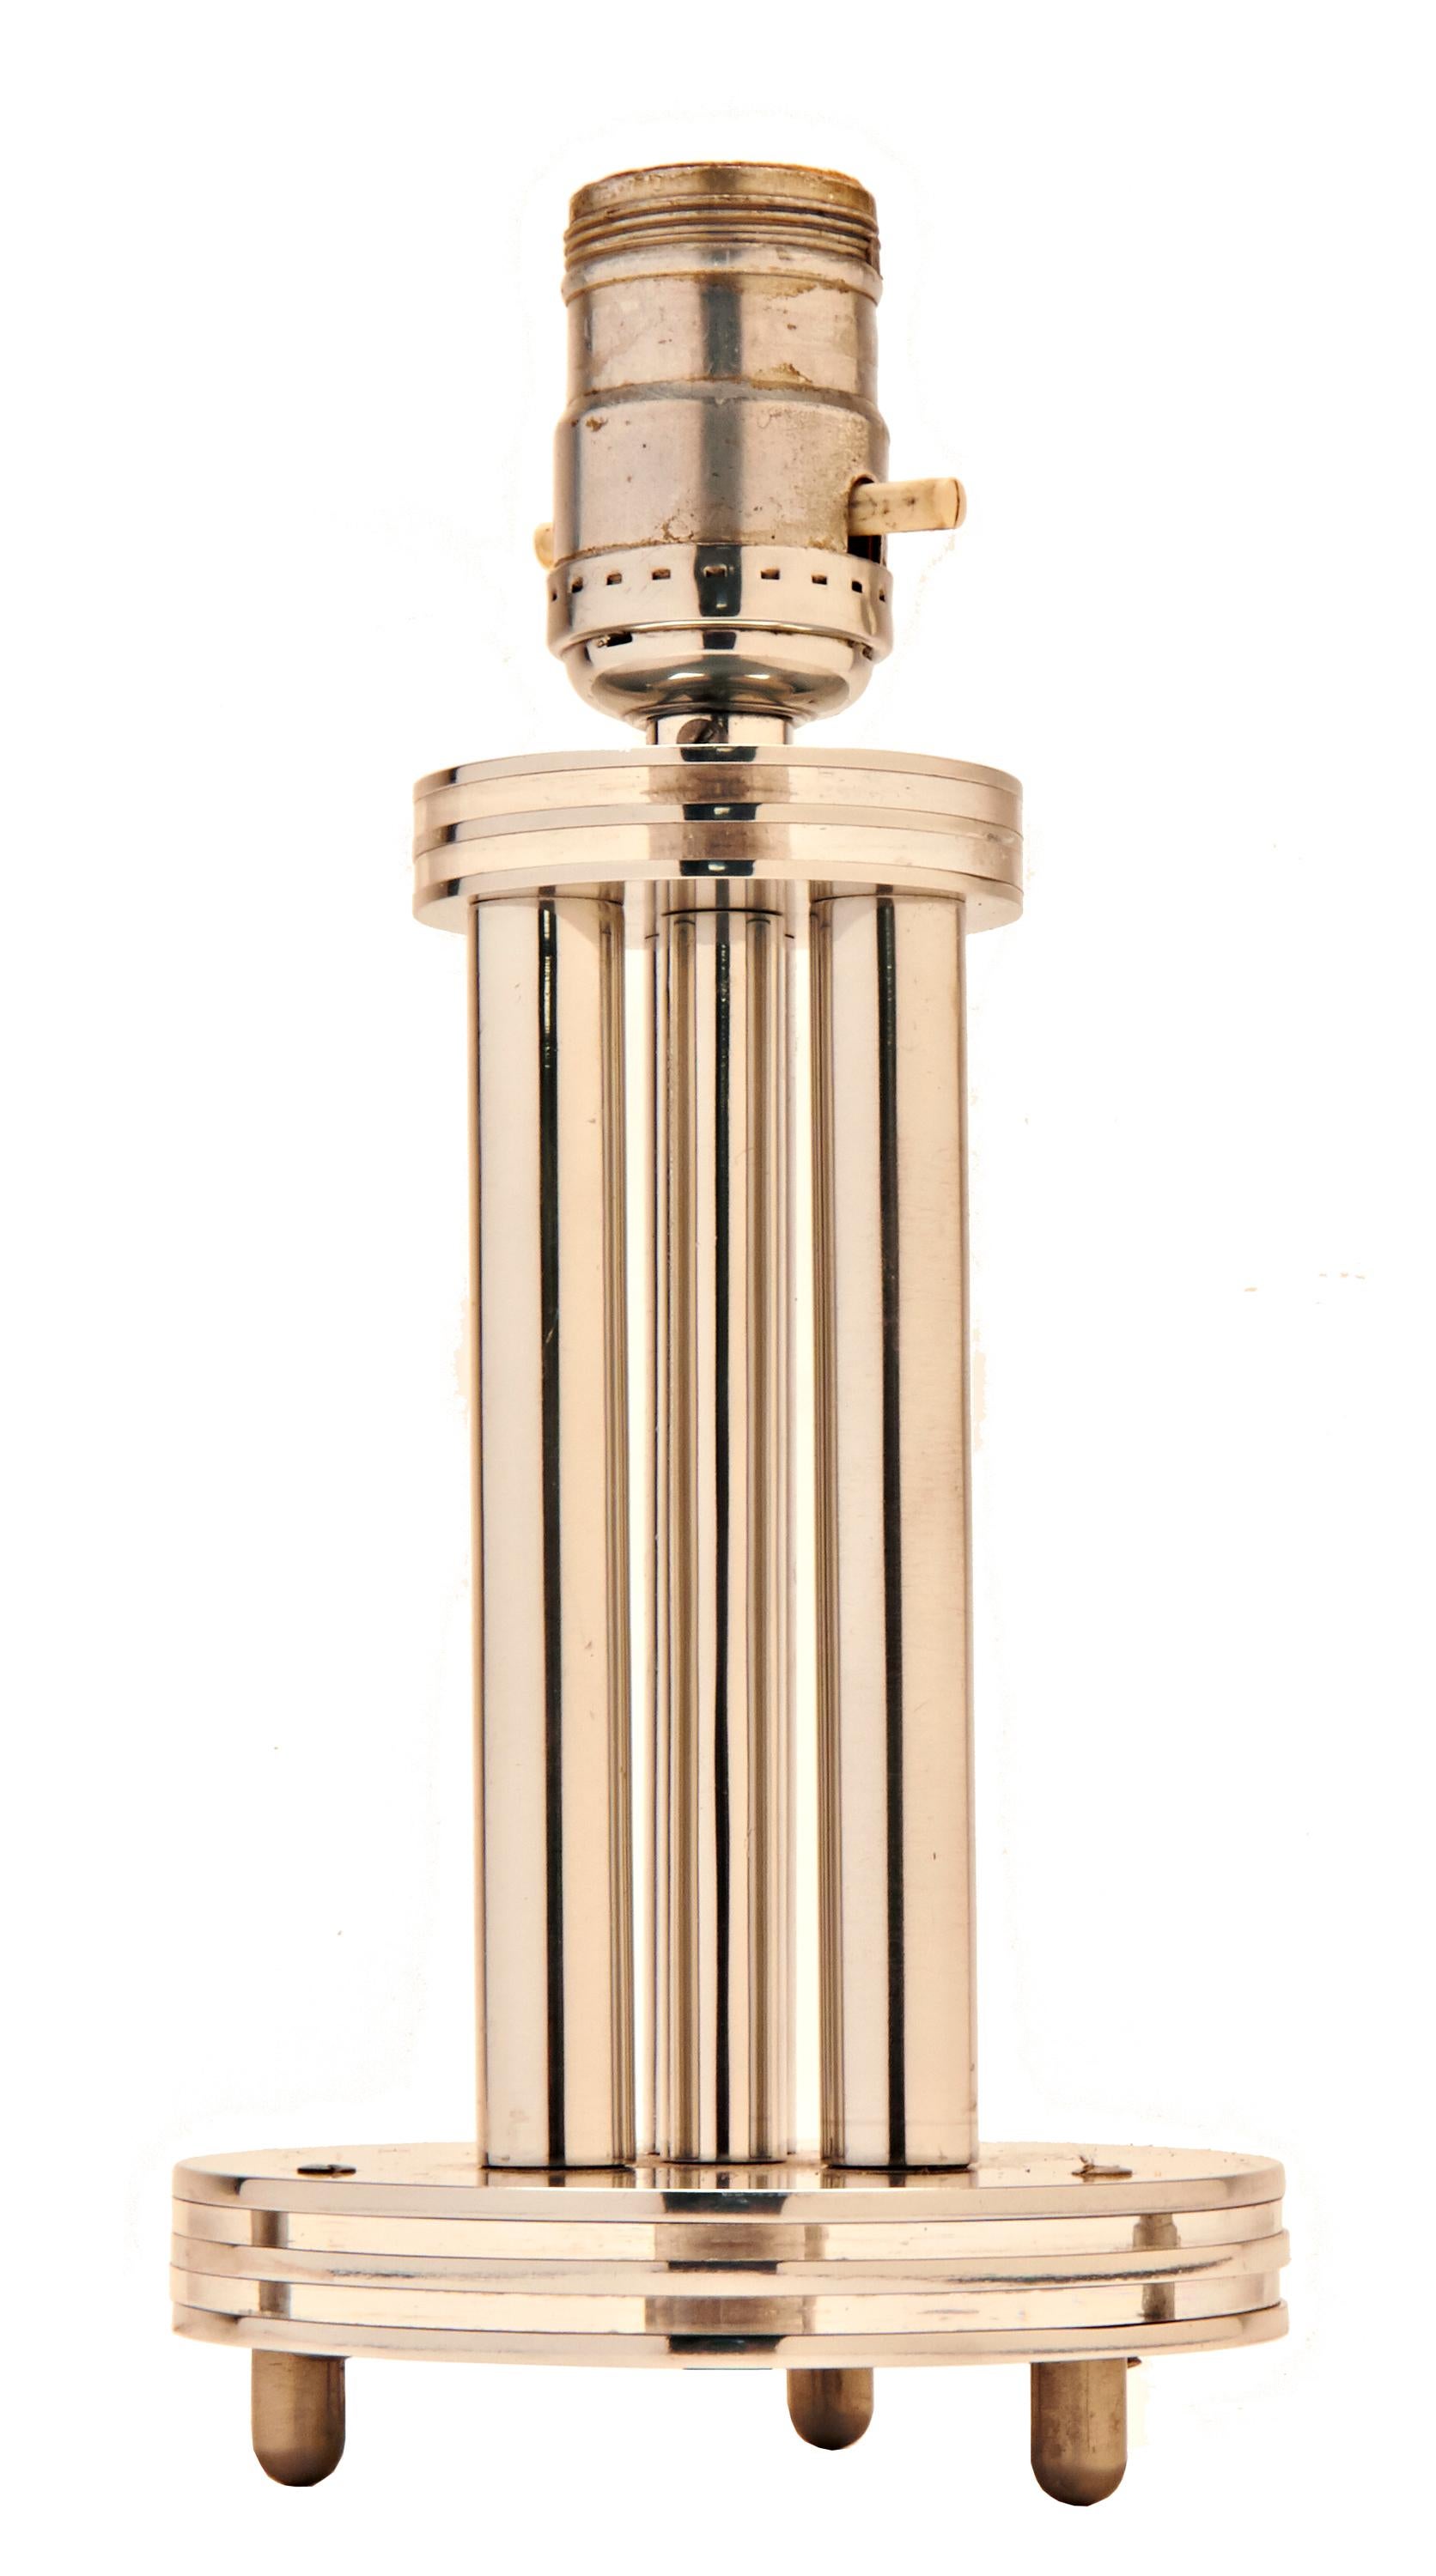 The body of this beautiful and architecturally designed American Art Deco/ Machine Age accent lamp is constructed from a circular base and cap each constructed from three disks of high polished aluminum that sandwich two disks of clear Lucite.